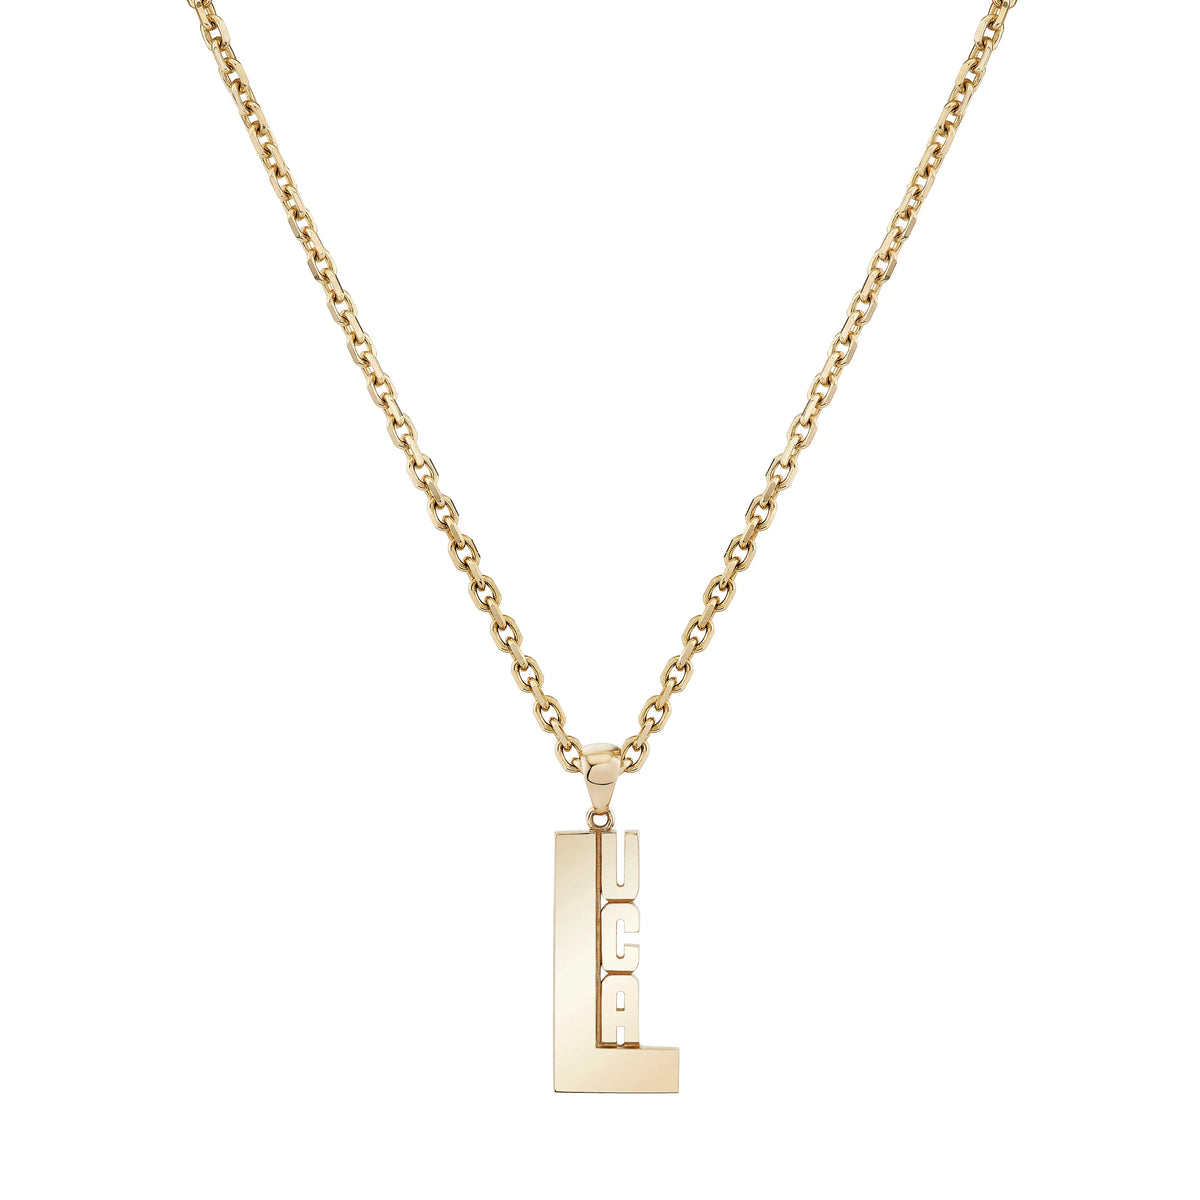 Drop monogram lariat necklace with sideways heart symbol - personalize it  with your initials.